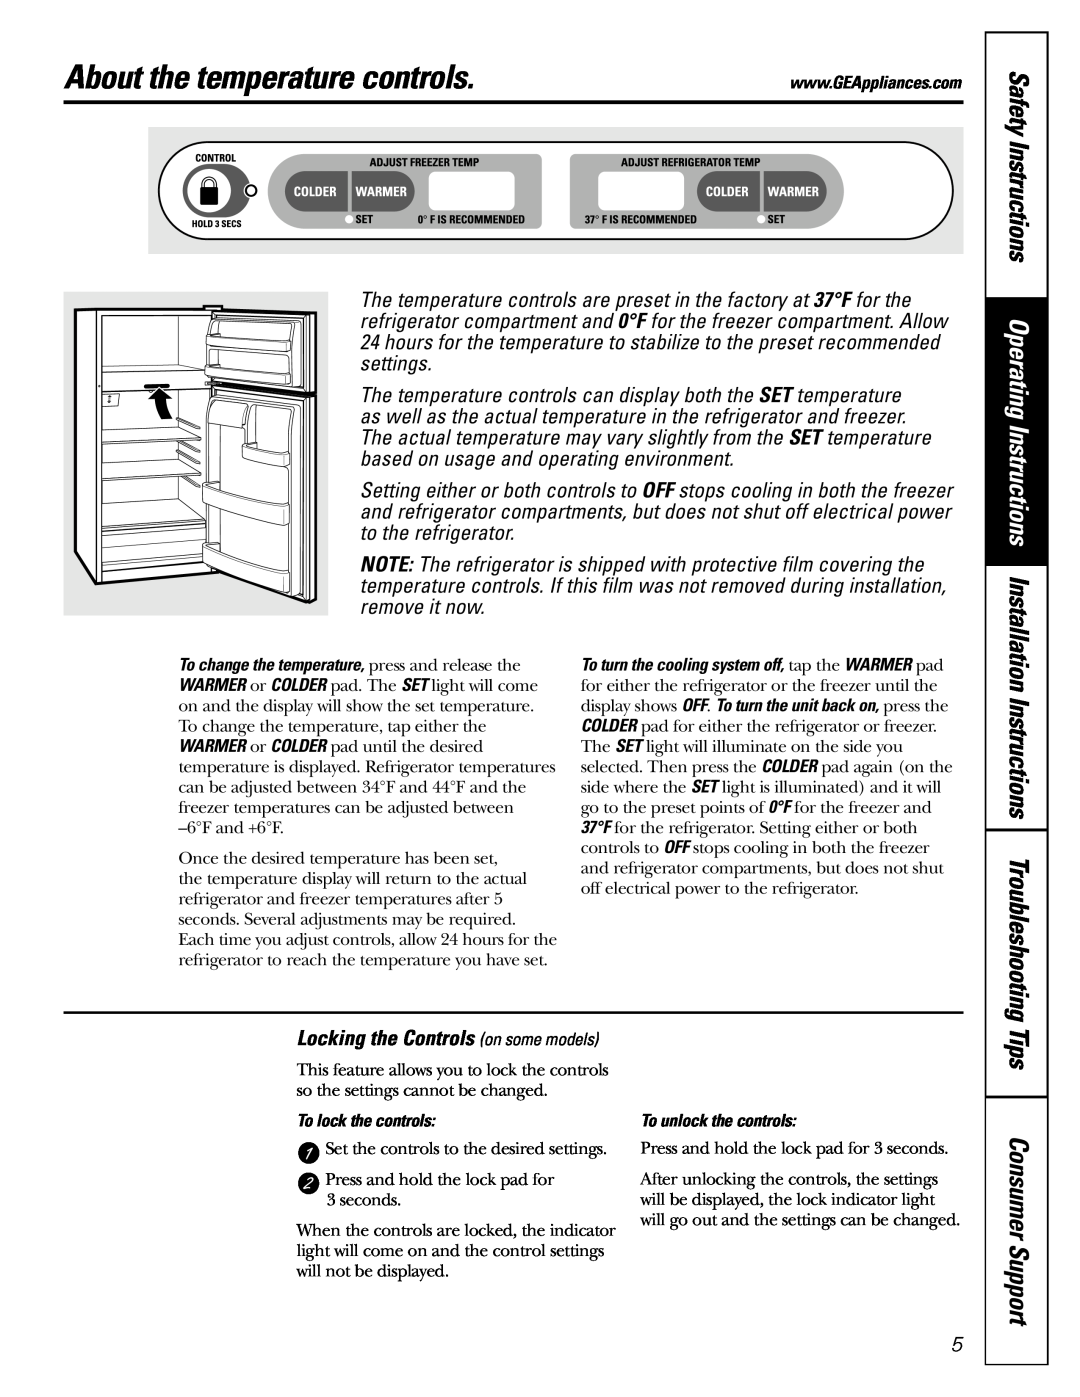 LG Electronics 25, 22 owner manual About the temperature controls, Instructions Troubleshooting, Consumer Support 